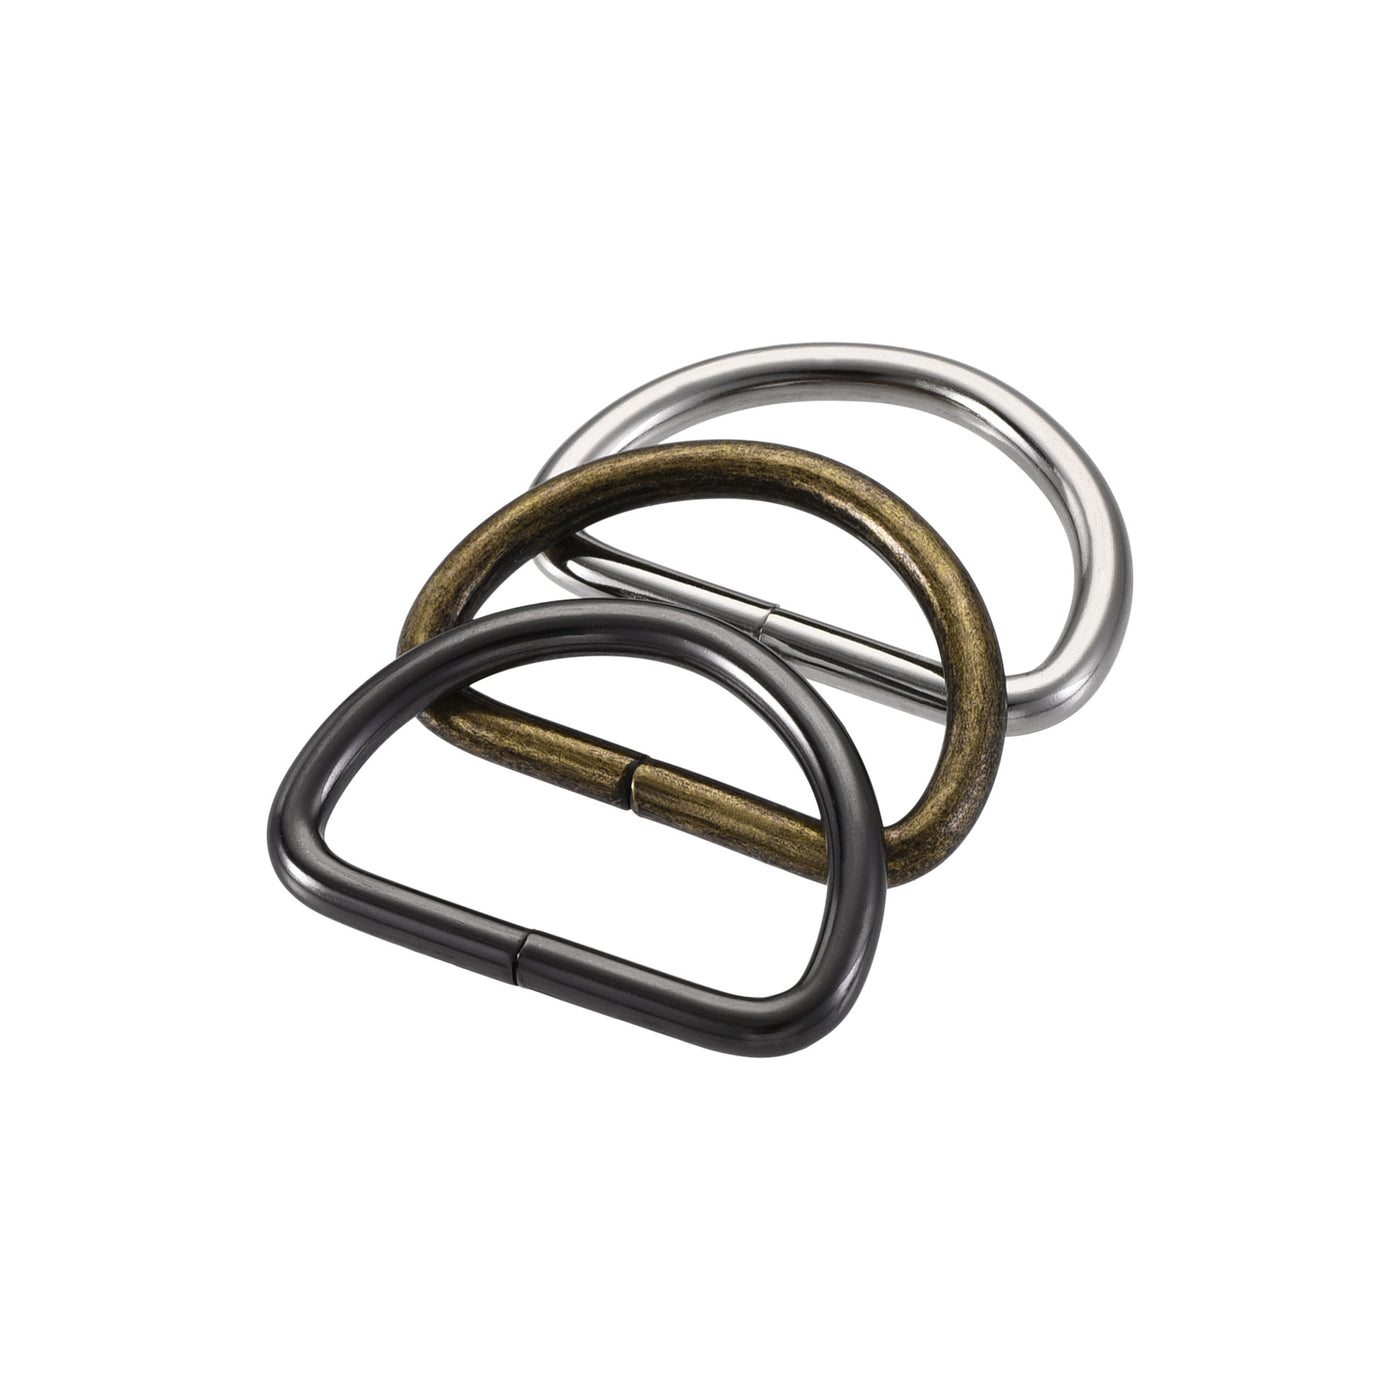 uxcell Uxcell Metal D Ring 1.26"(32mm) D-Rings Buckle Silver Tone, Bronze Tone, Black(Total 15pcs)